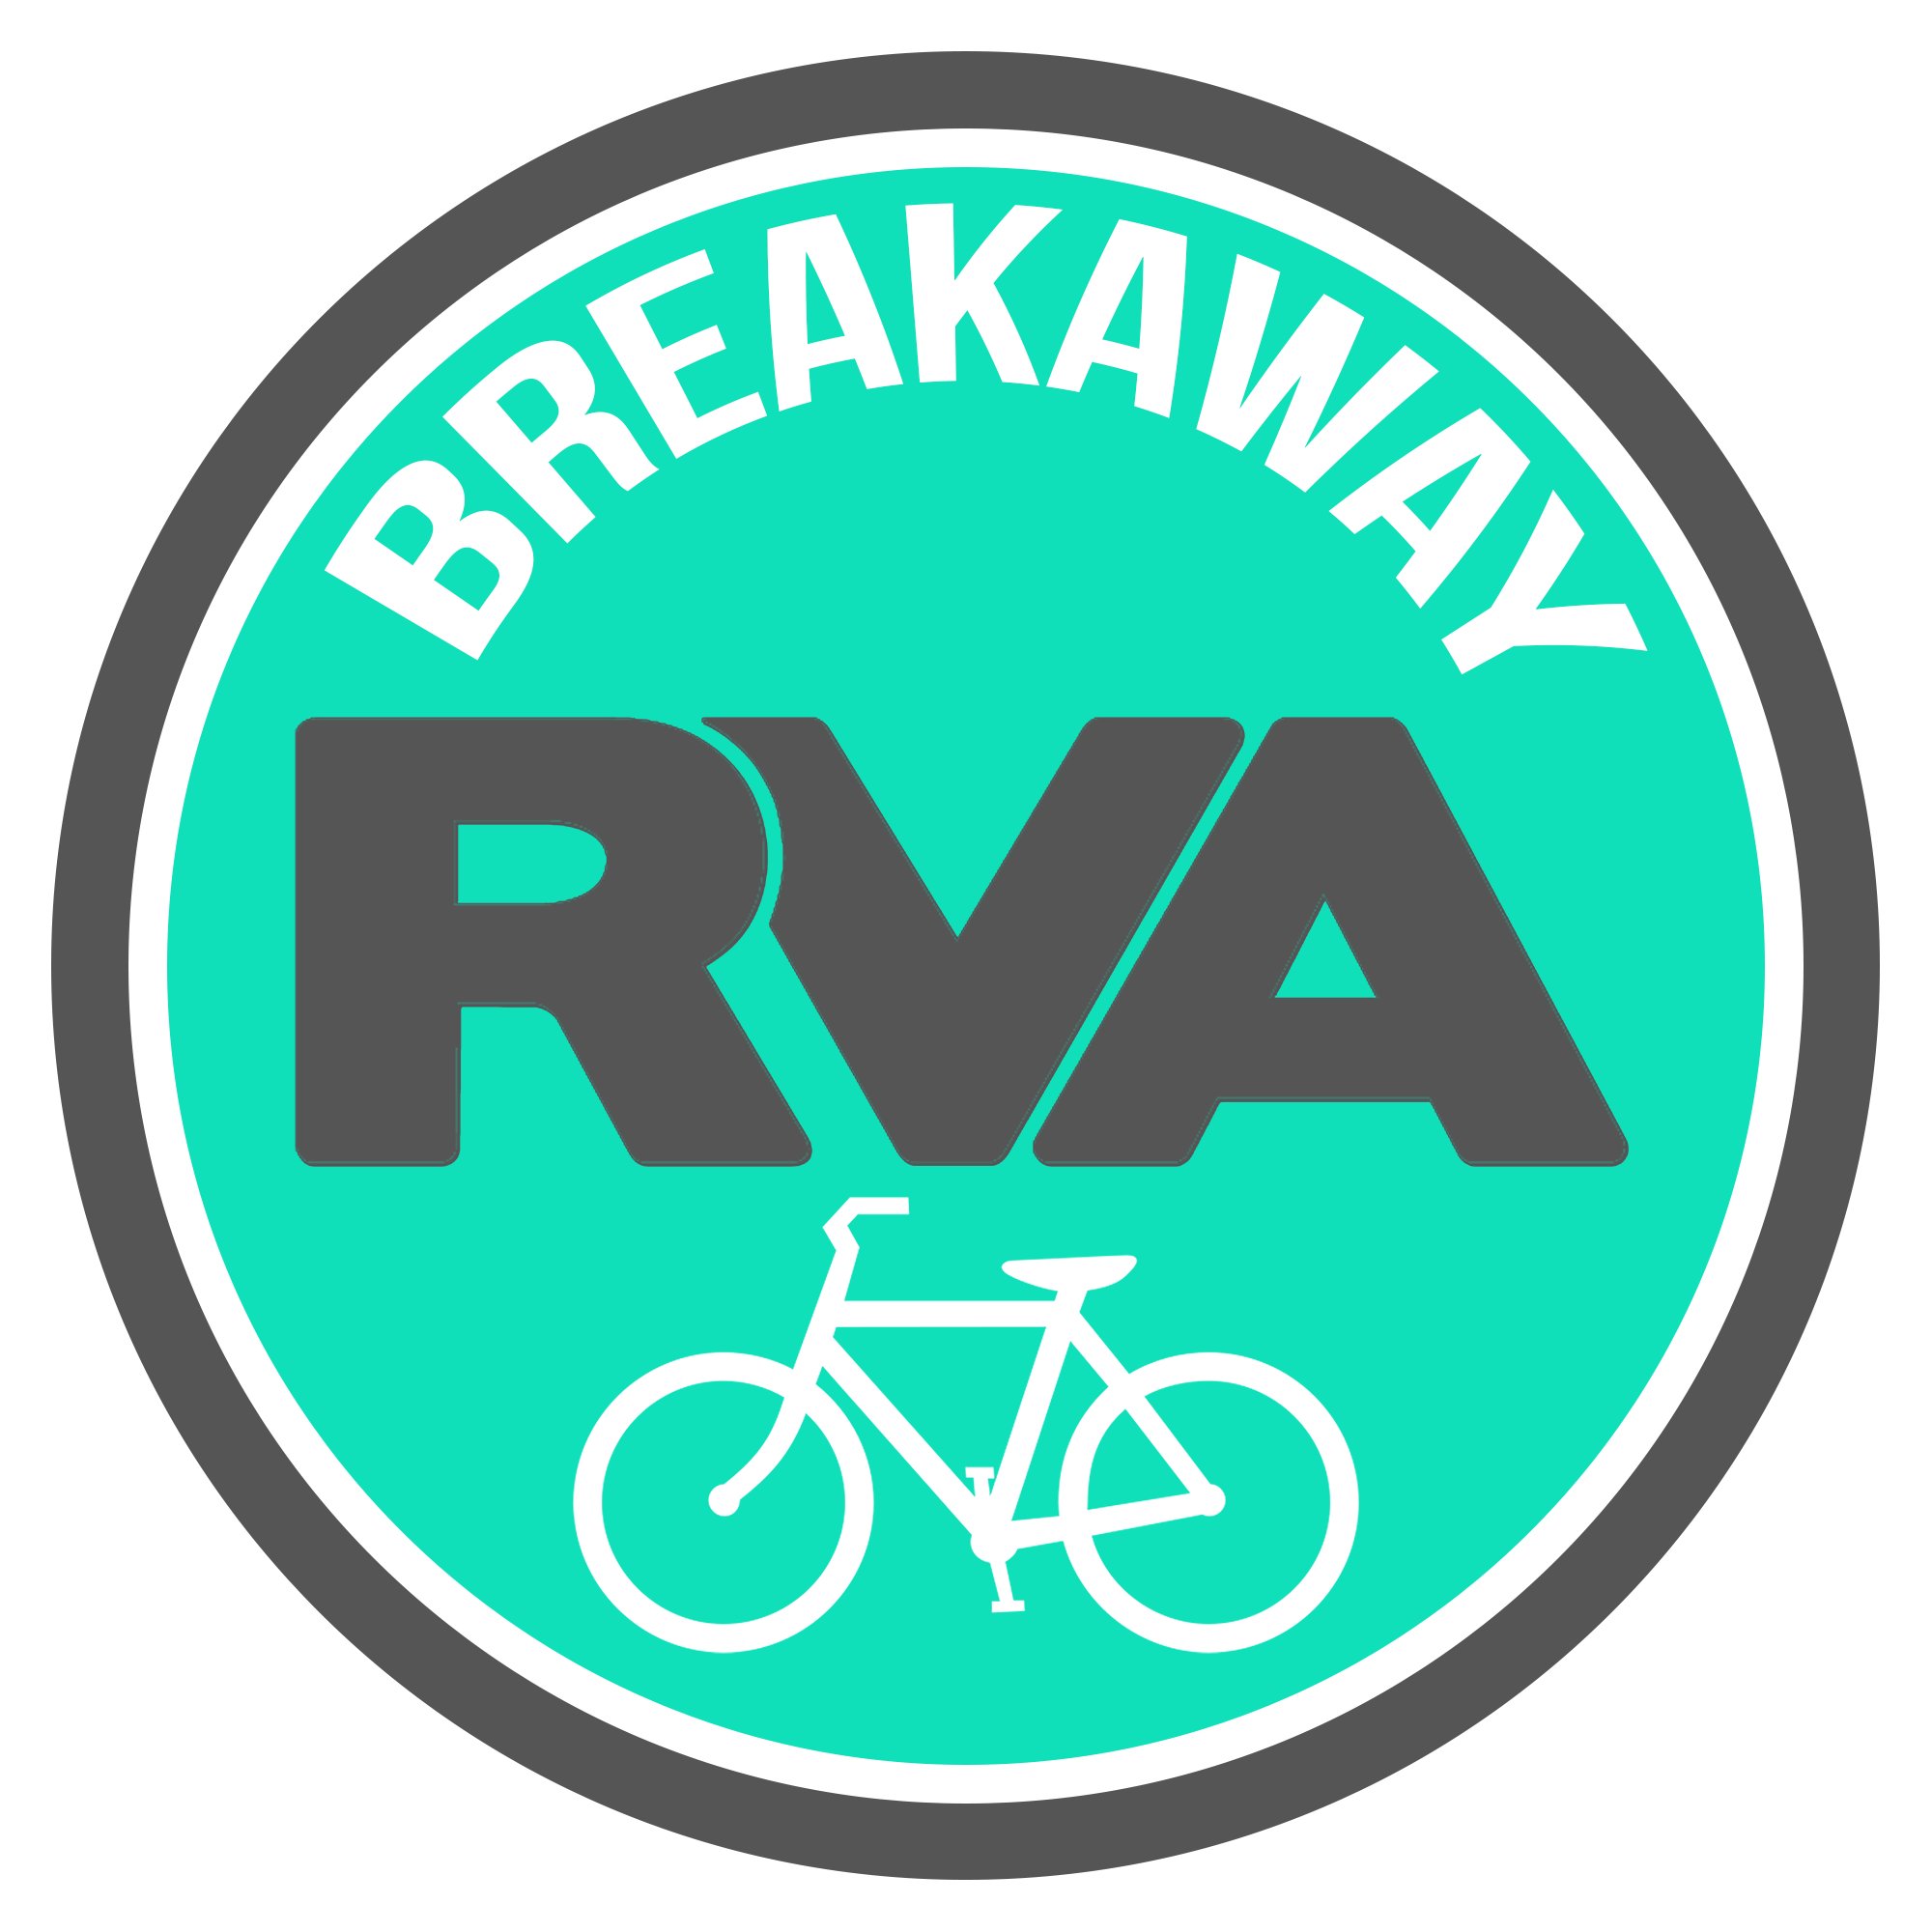 Our mission is to build community through biking and build biking through community. Explore RVA, learn history & make a friend through a group ride!